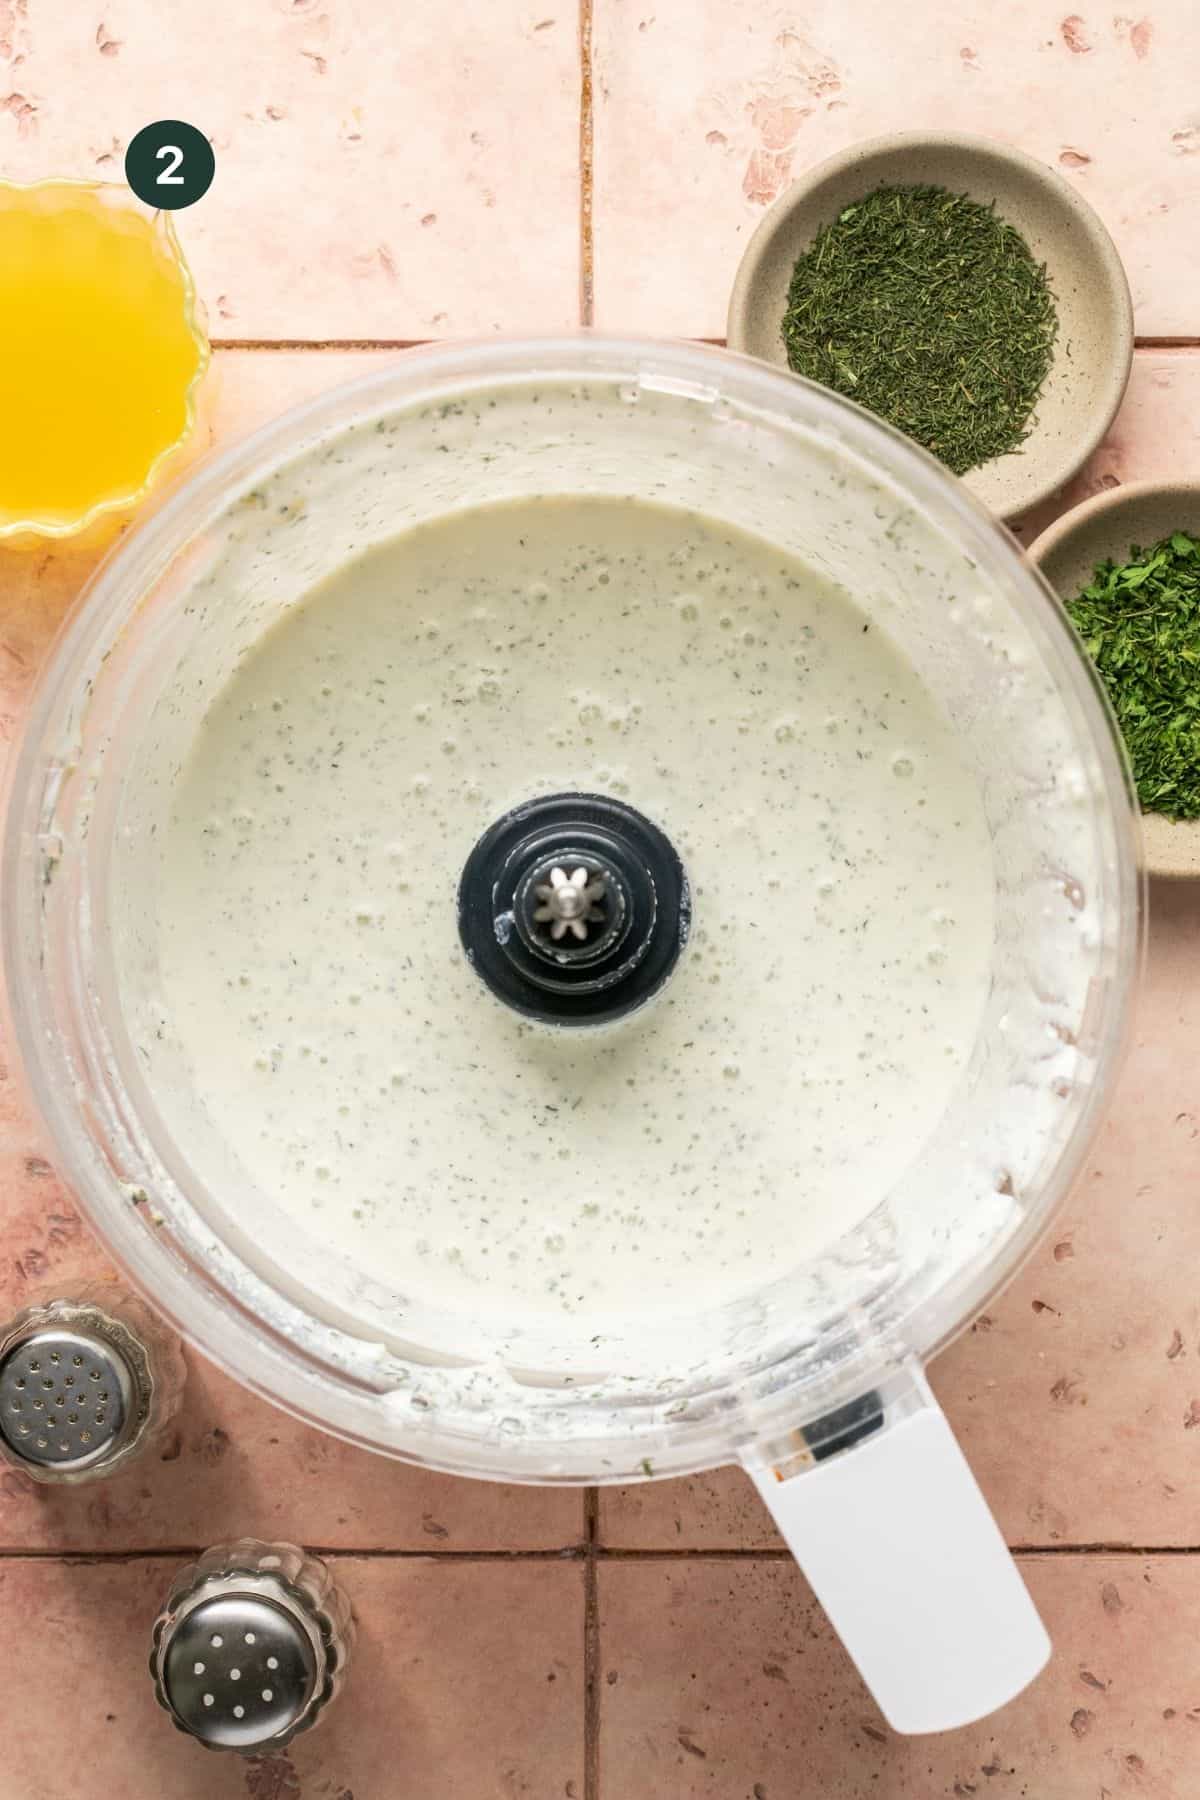 All ingredients blended in a food processor.